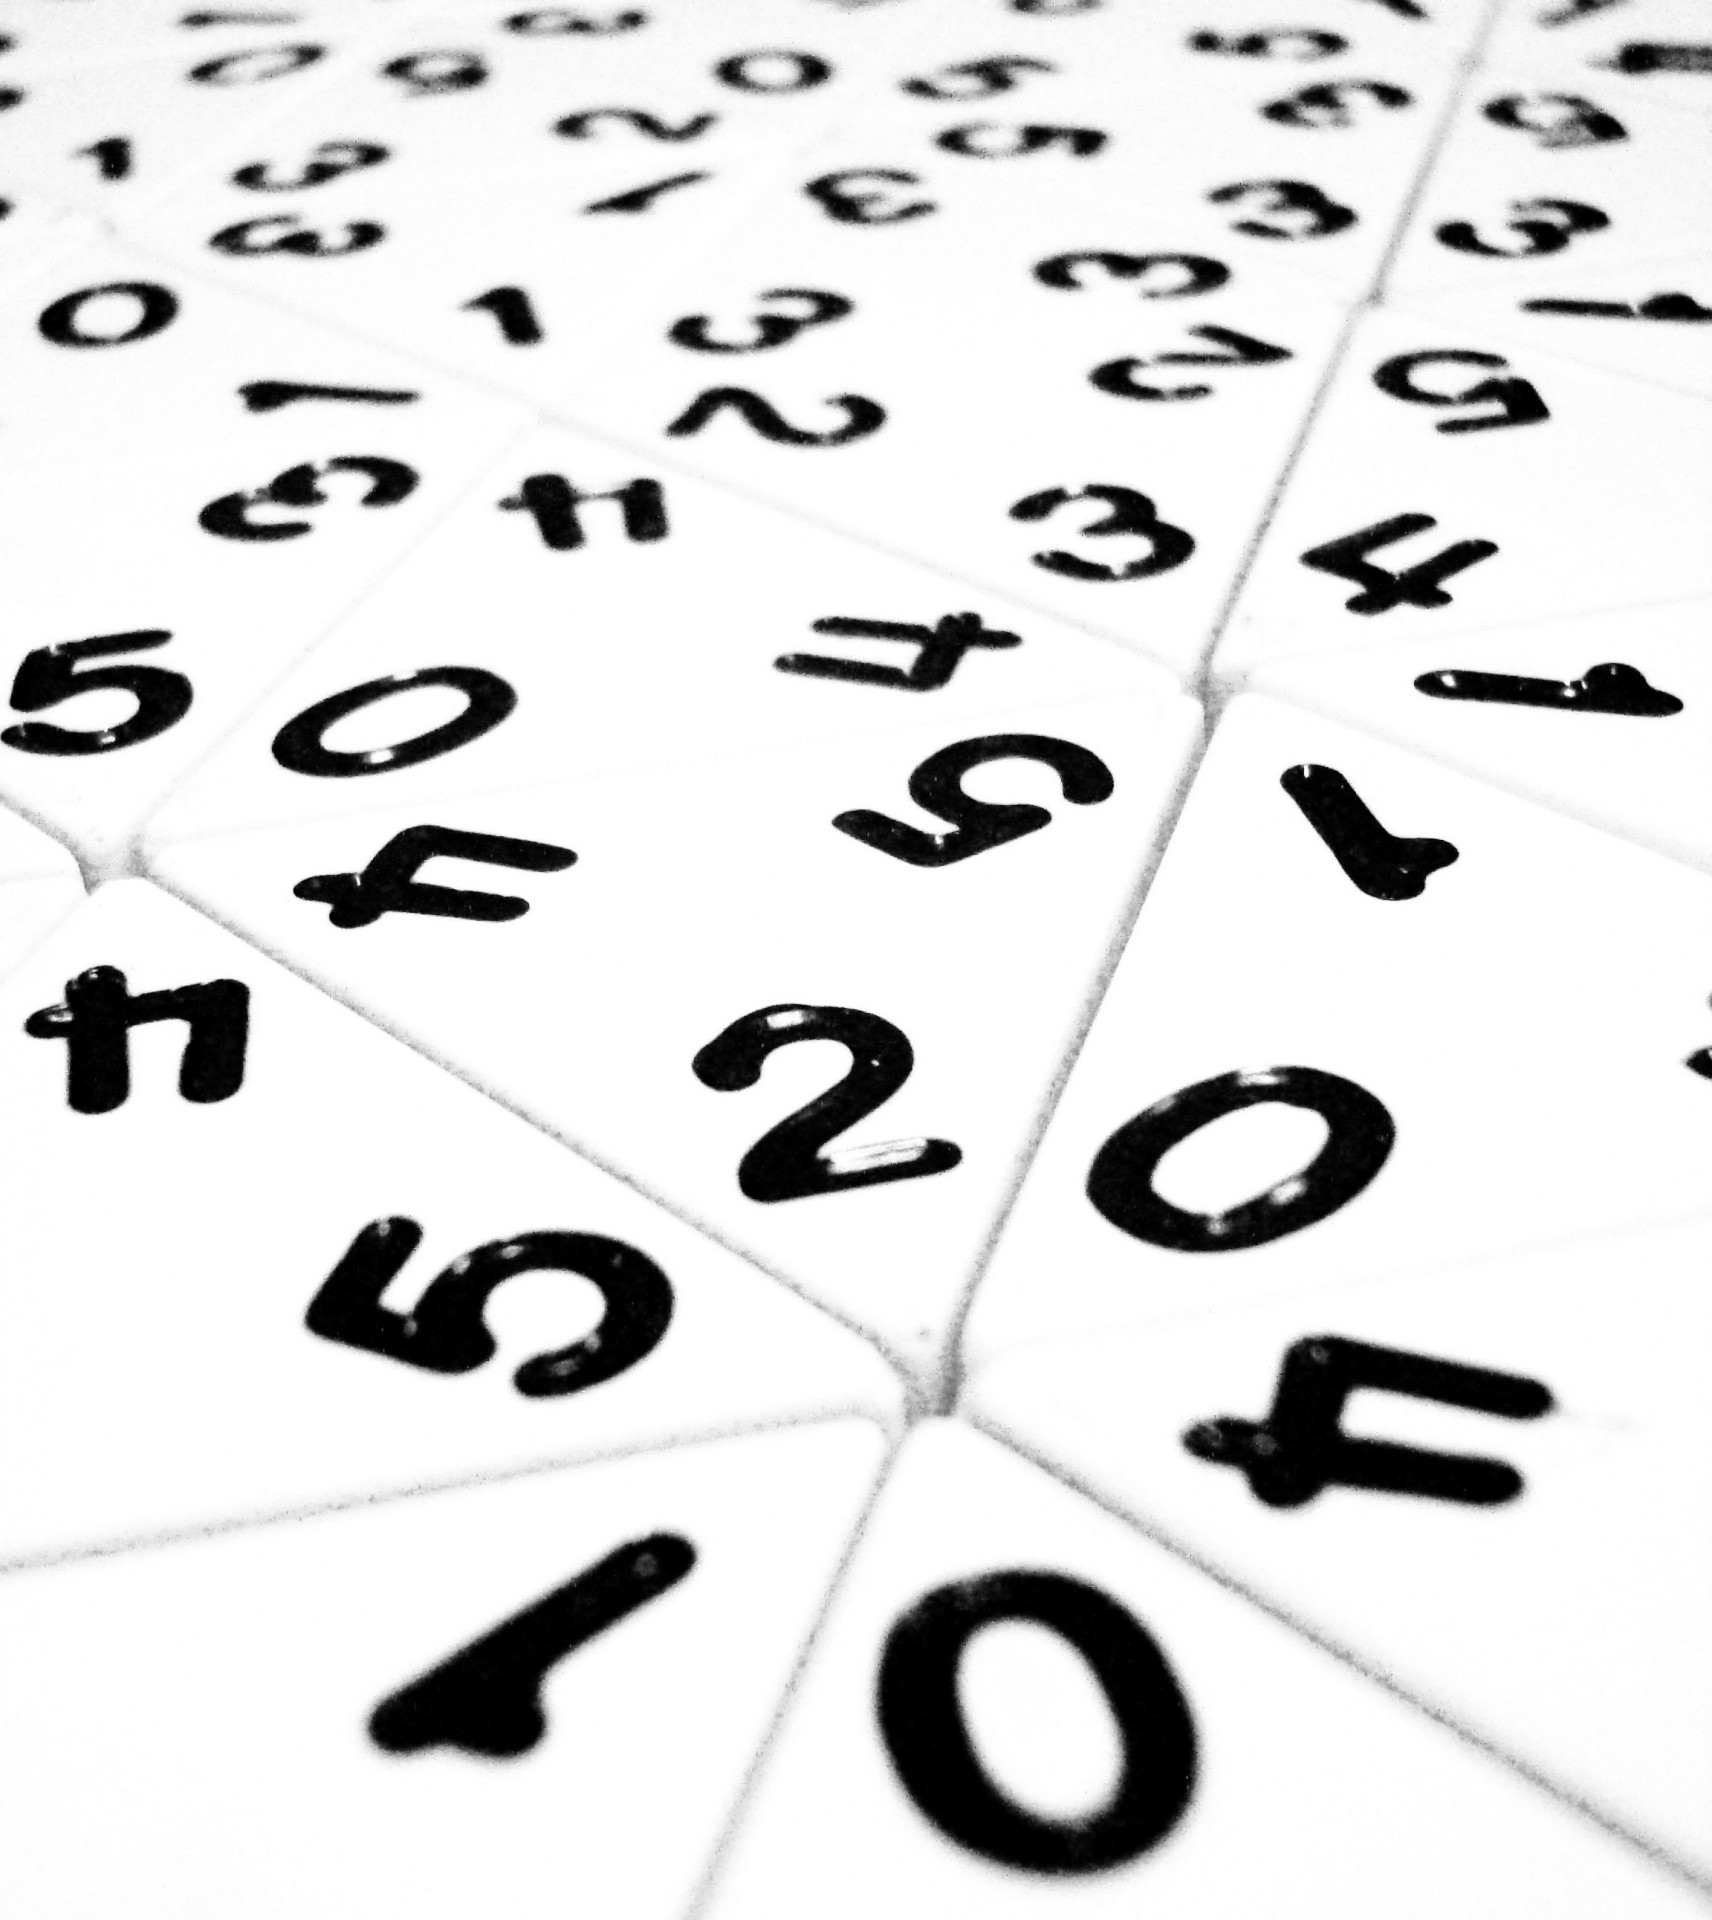 random,numbers,number,mix,mixed,small,individual,many,lots of,tile,tiles,digit,digits,numerical,variables,chance,odds,math,maths,mathematics,accounts,accountancy,balance,win,winner,one,first,pattern,background,texture,random numbers,free pictures, free photos, free images, royalty free, free illustrations, public domain